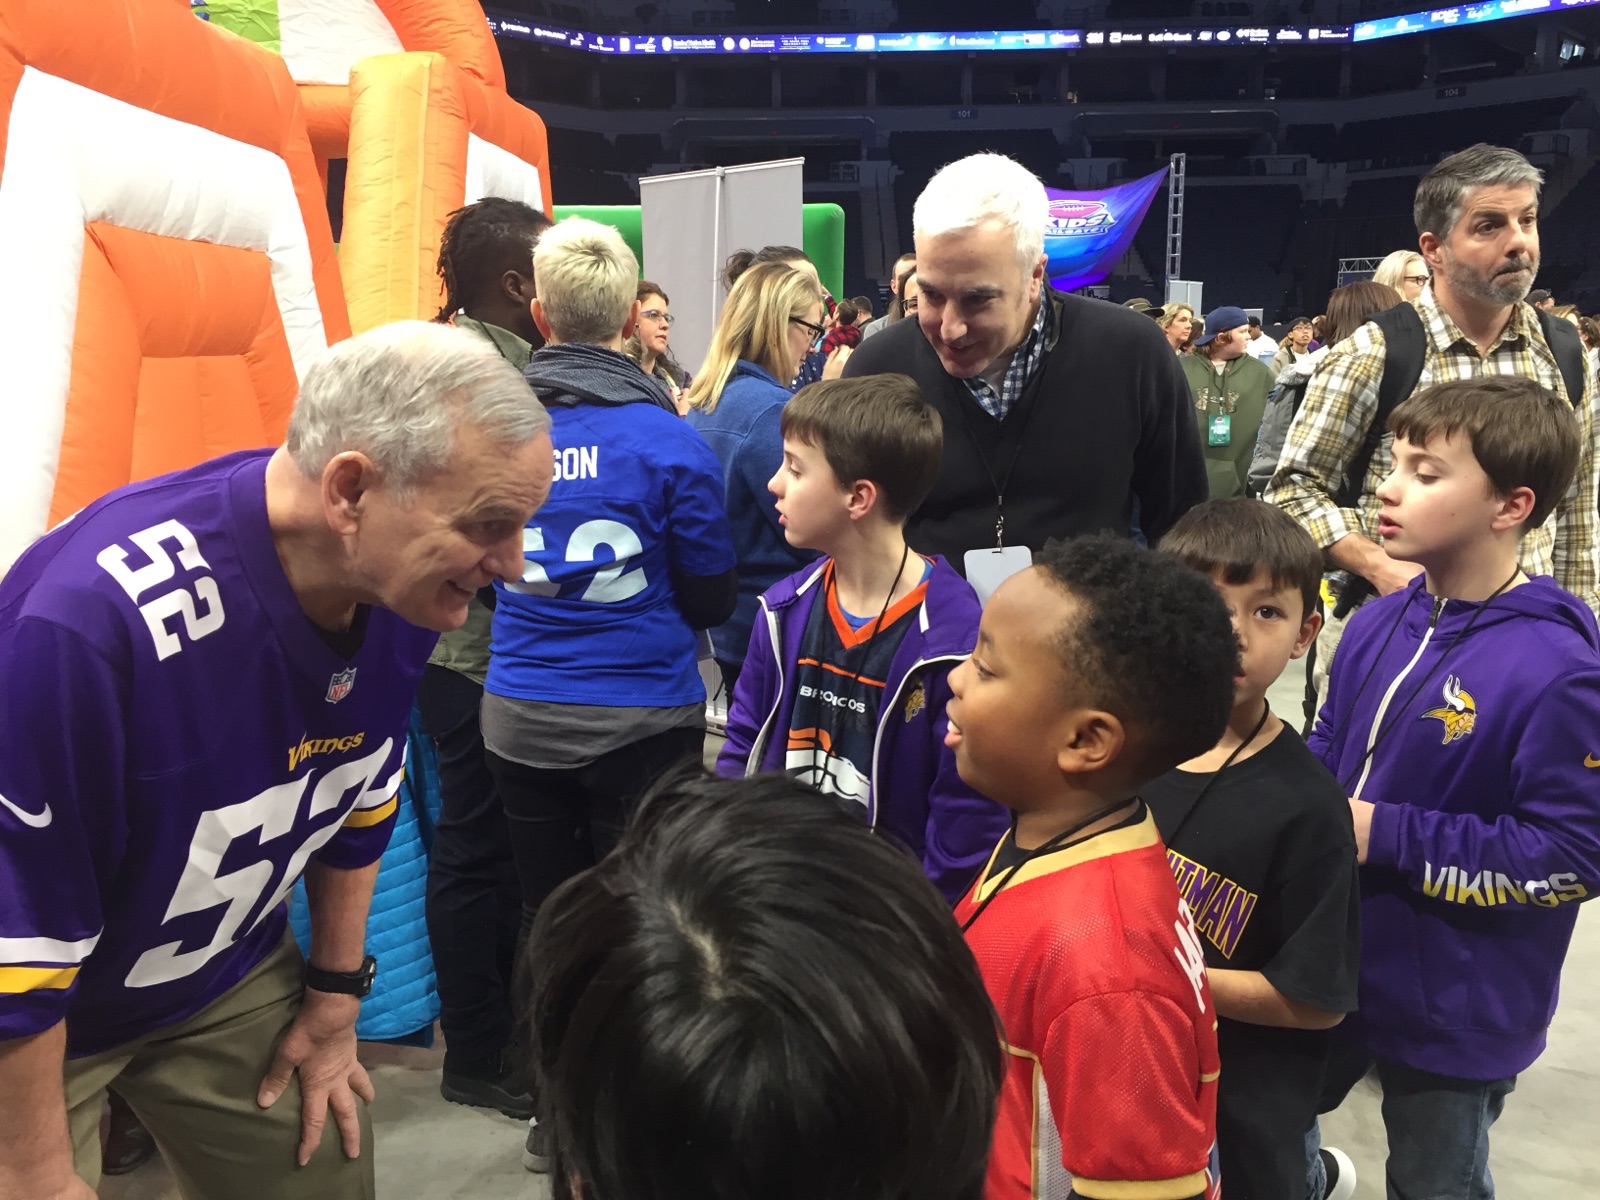 Governor Mark Dayton celebrates Super Bowl Week at the Kids Tailgate Party in Minneapolis